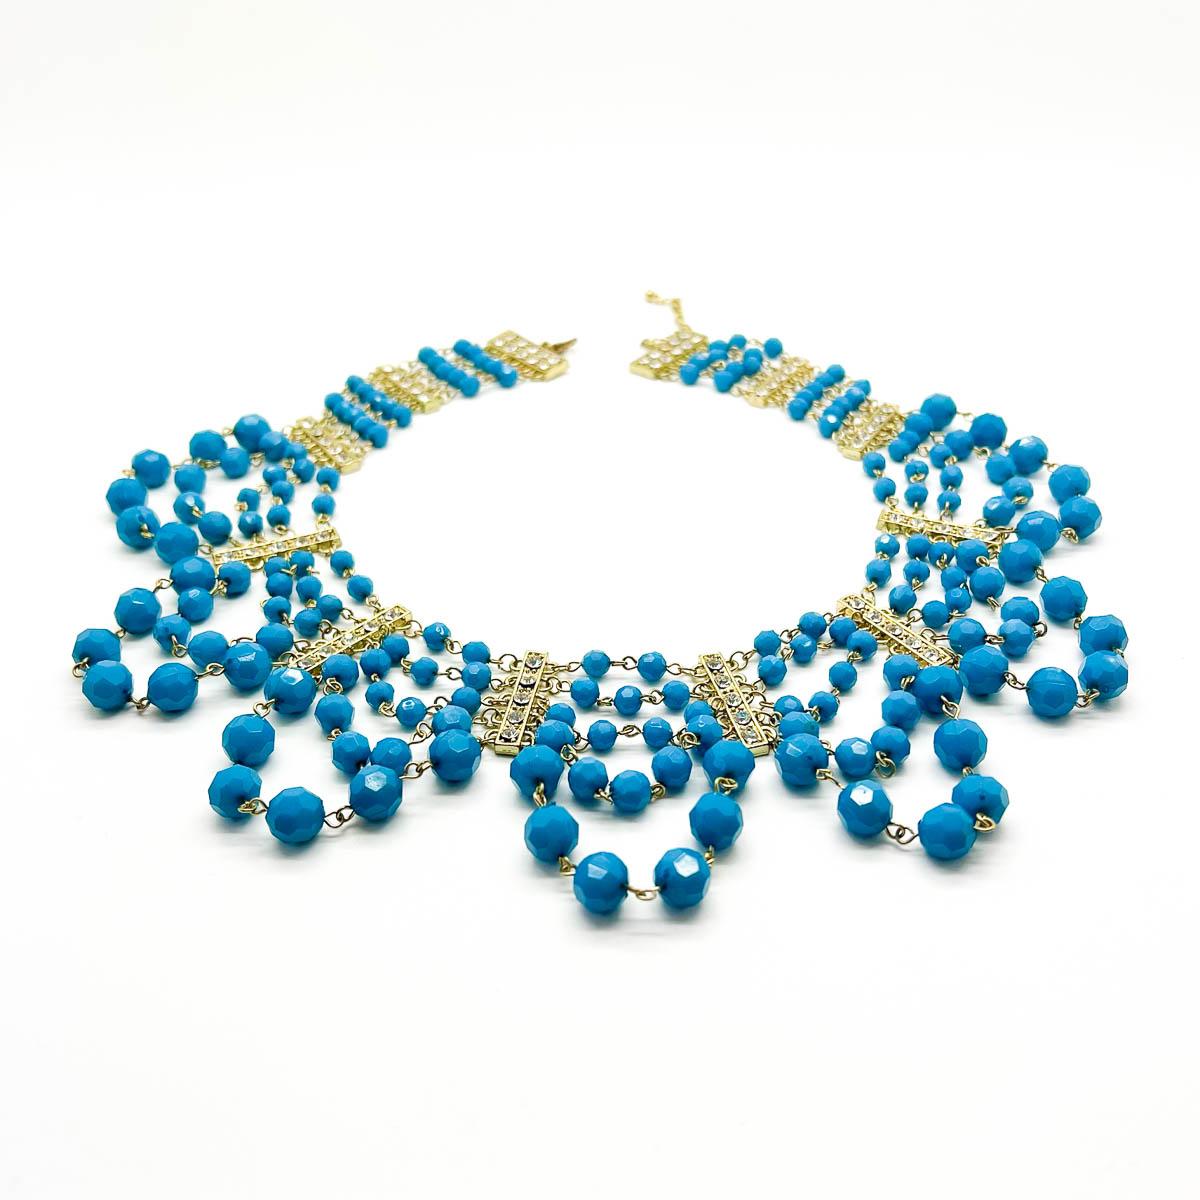 A wonderful Turquoise Crystal Festoon Collar. Featuring rows and rows of beads punctuated with crystal stations. A stunning statement vibe for your look.
An unsigned beauty. A rare treasure. Just because a jewel doesn’t carry a designer name,